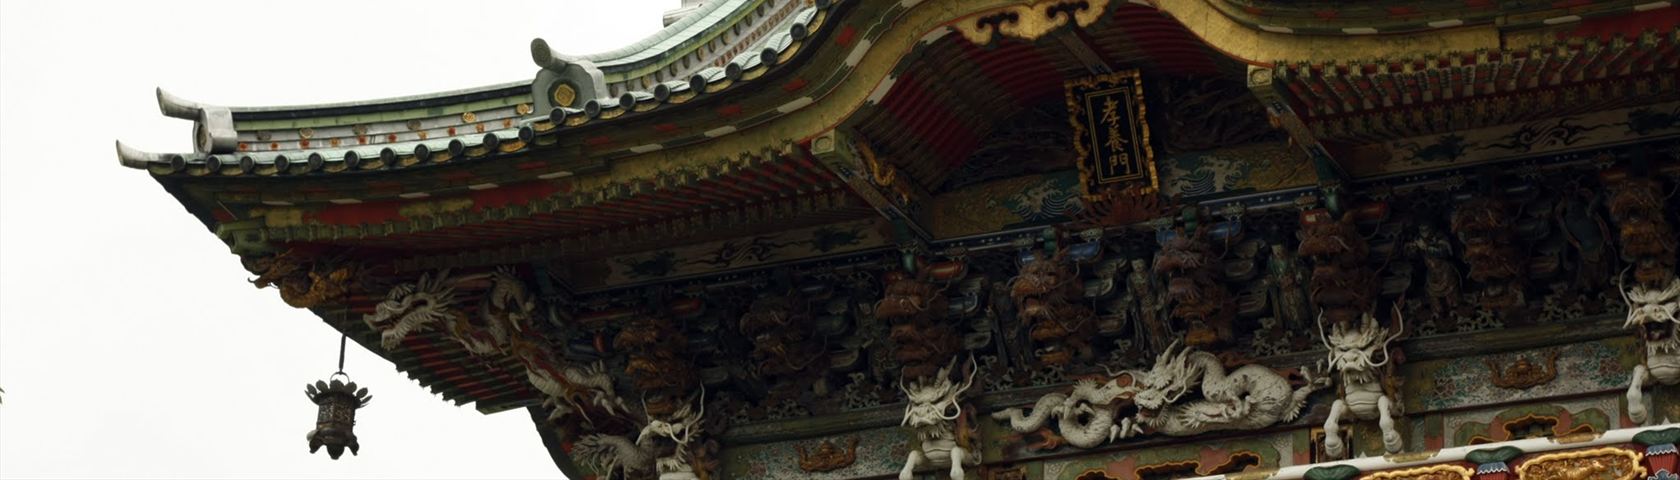 Japanese Temple Roofing